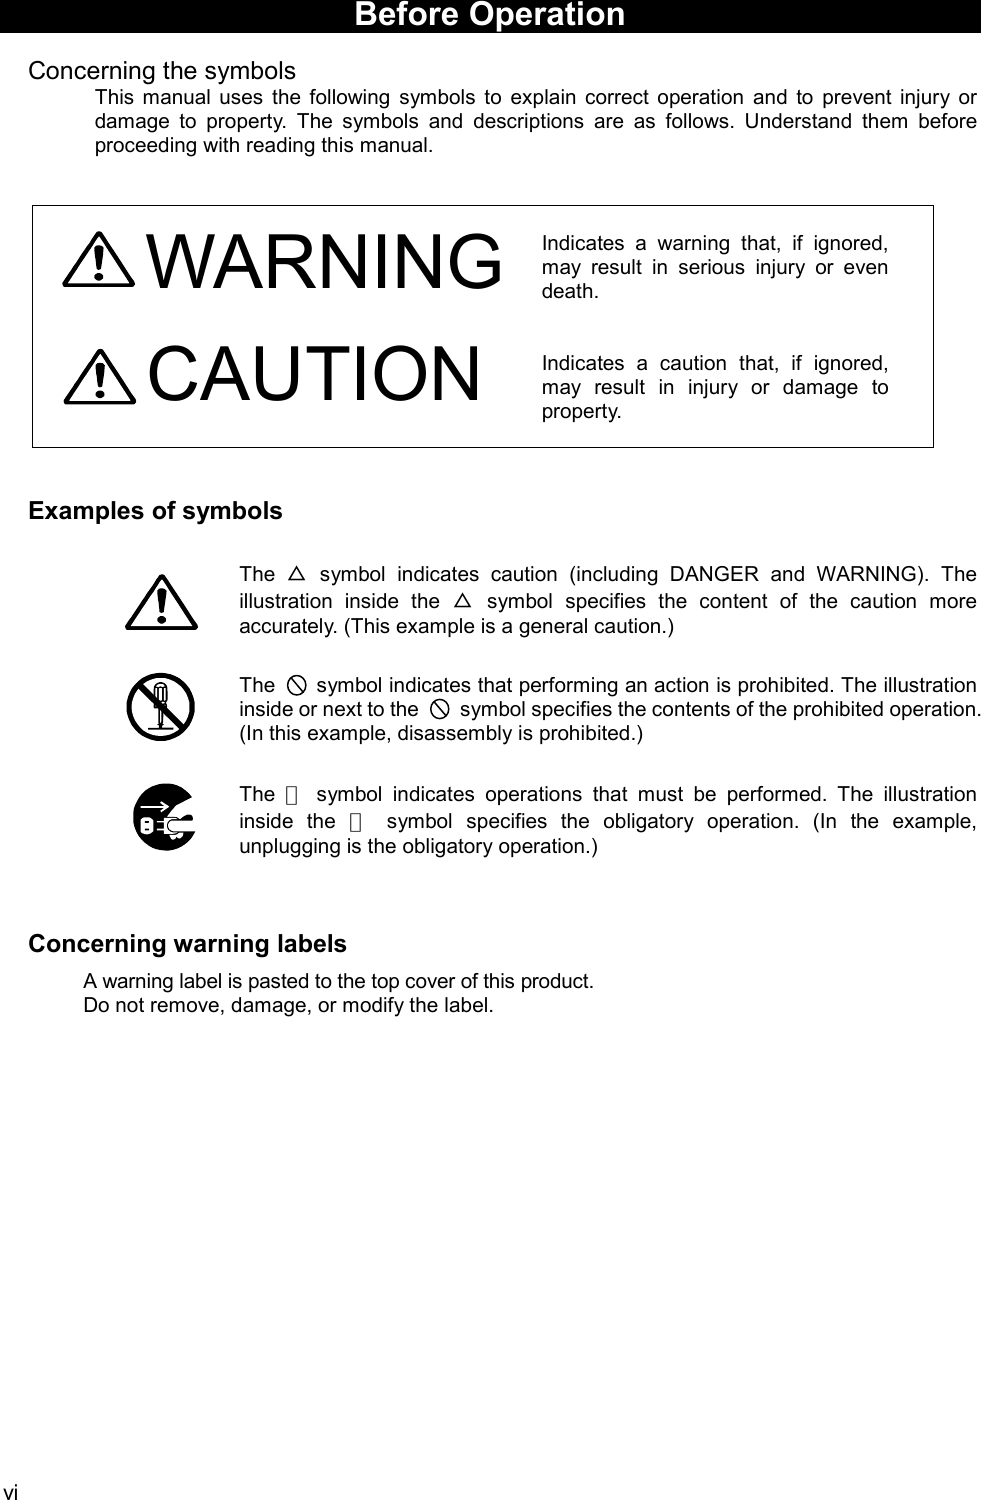 viWARNINGBefore Operation  Concerning the symbolsThis manual uses the following symbols to explain correct operation and to prevent injury ordamage to property. The symbols and descriptions are as follows. Understand them beforeproceeding with reading this manual.Indicates a warning that, if ignored,may result in serious injury or evendeath.Indicates a caution that, if ignored,may result in injury or damage toproperty.  Examples of symbolsThe  △ symbol indicates caution (including DANGER and WARNING). Theillustration inside the △ symbol specifies the content of the caution moreaccurately. (This example is a general caution.)The     symbol indicates that performing an action is prohibited. The illustrationinside or next to the     symbol specifies the contents of the prohibited operation.(In this example, disassembly is prohibited.)The  ● symbol indicates operations that must be performed. The illustrationinside the ● symbol specifies the obligatory operation. (In the example,unplugging is the obligatory operation.)  Concerning warning labelsA warning label is pasted to the top cover of this product.Do not remove, damage, or modify the label.CAUTION